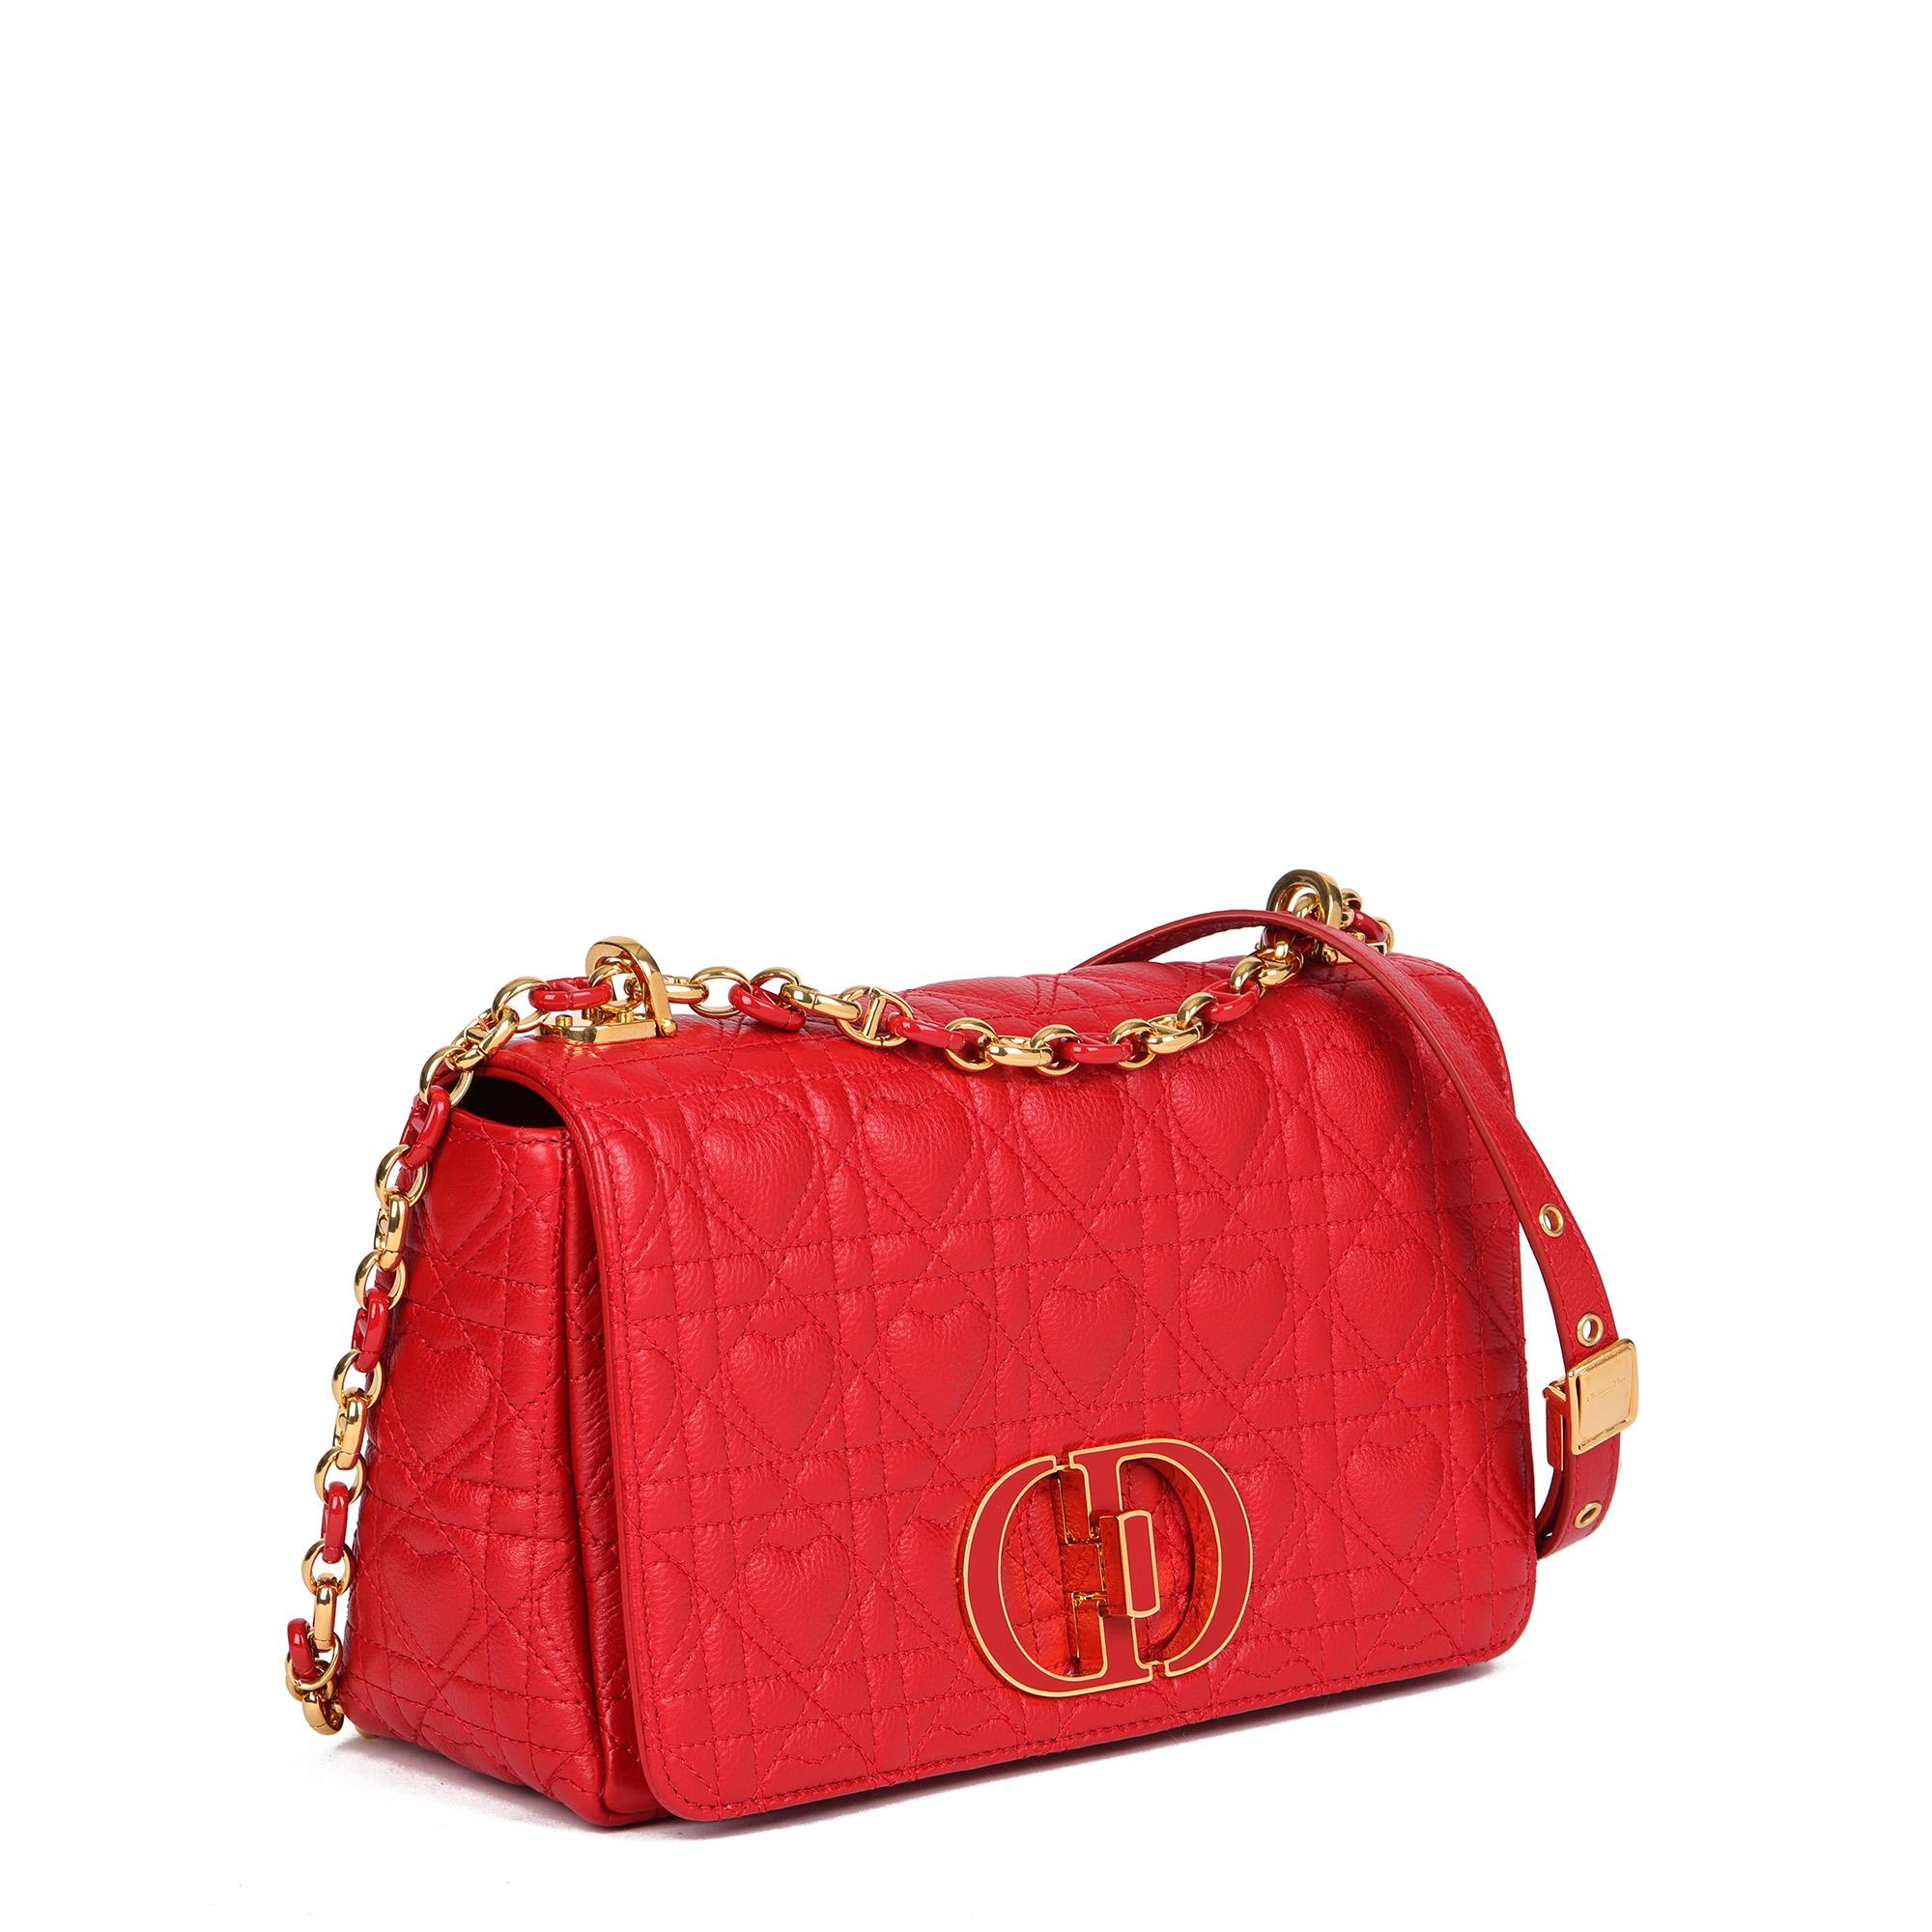 CHRISTIAN DIOR
Red Heart Quilted Calfskin Leather DiorAmour Medium Caro 

Xupes Reference: HB4643
Serial Number: 62-MA-0261
Age (Circa): 2021
Accompanied By: Christian Dior Dust Bag, Box, Authenticity Card, Care Booklet
Authenticity Details: Date